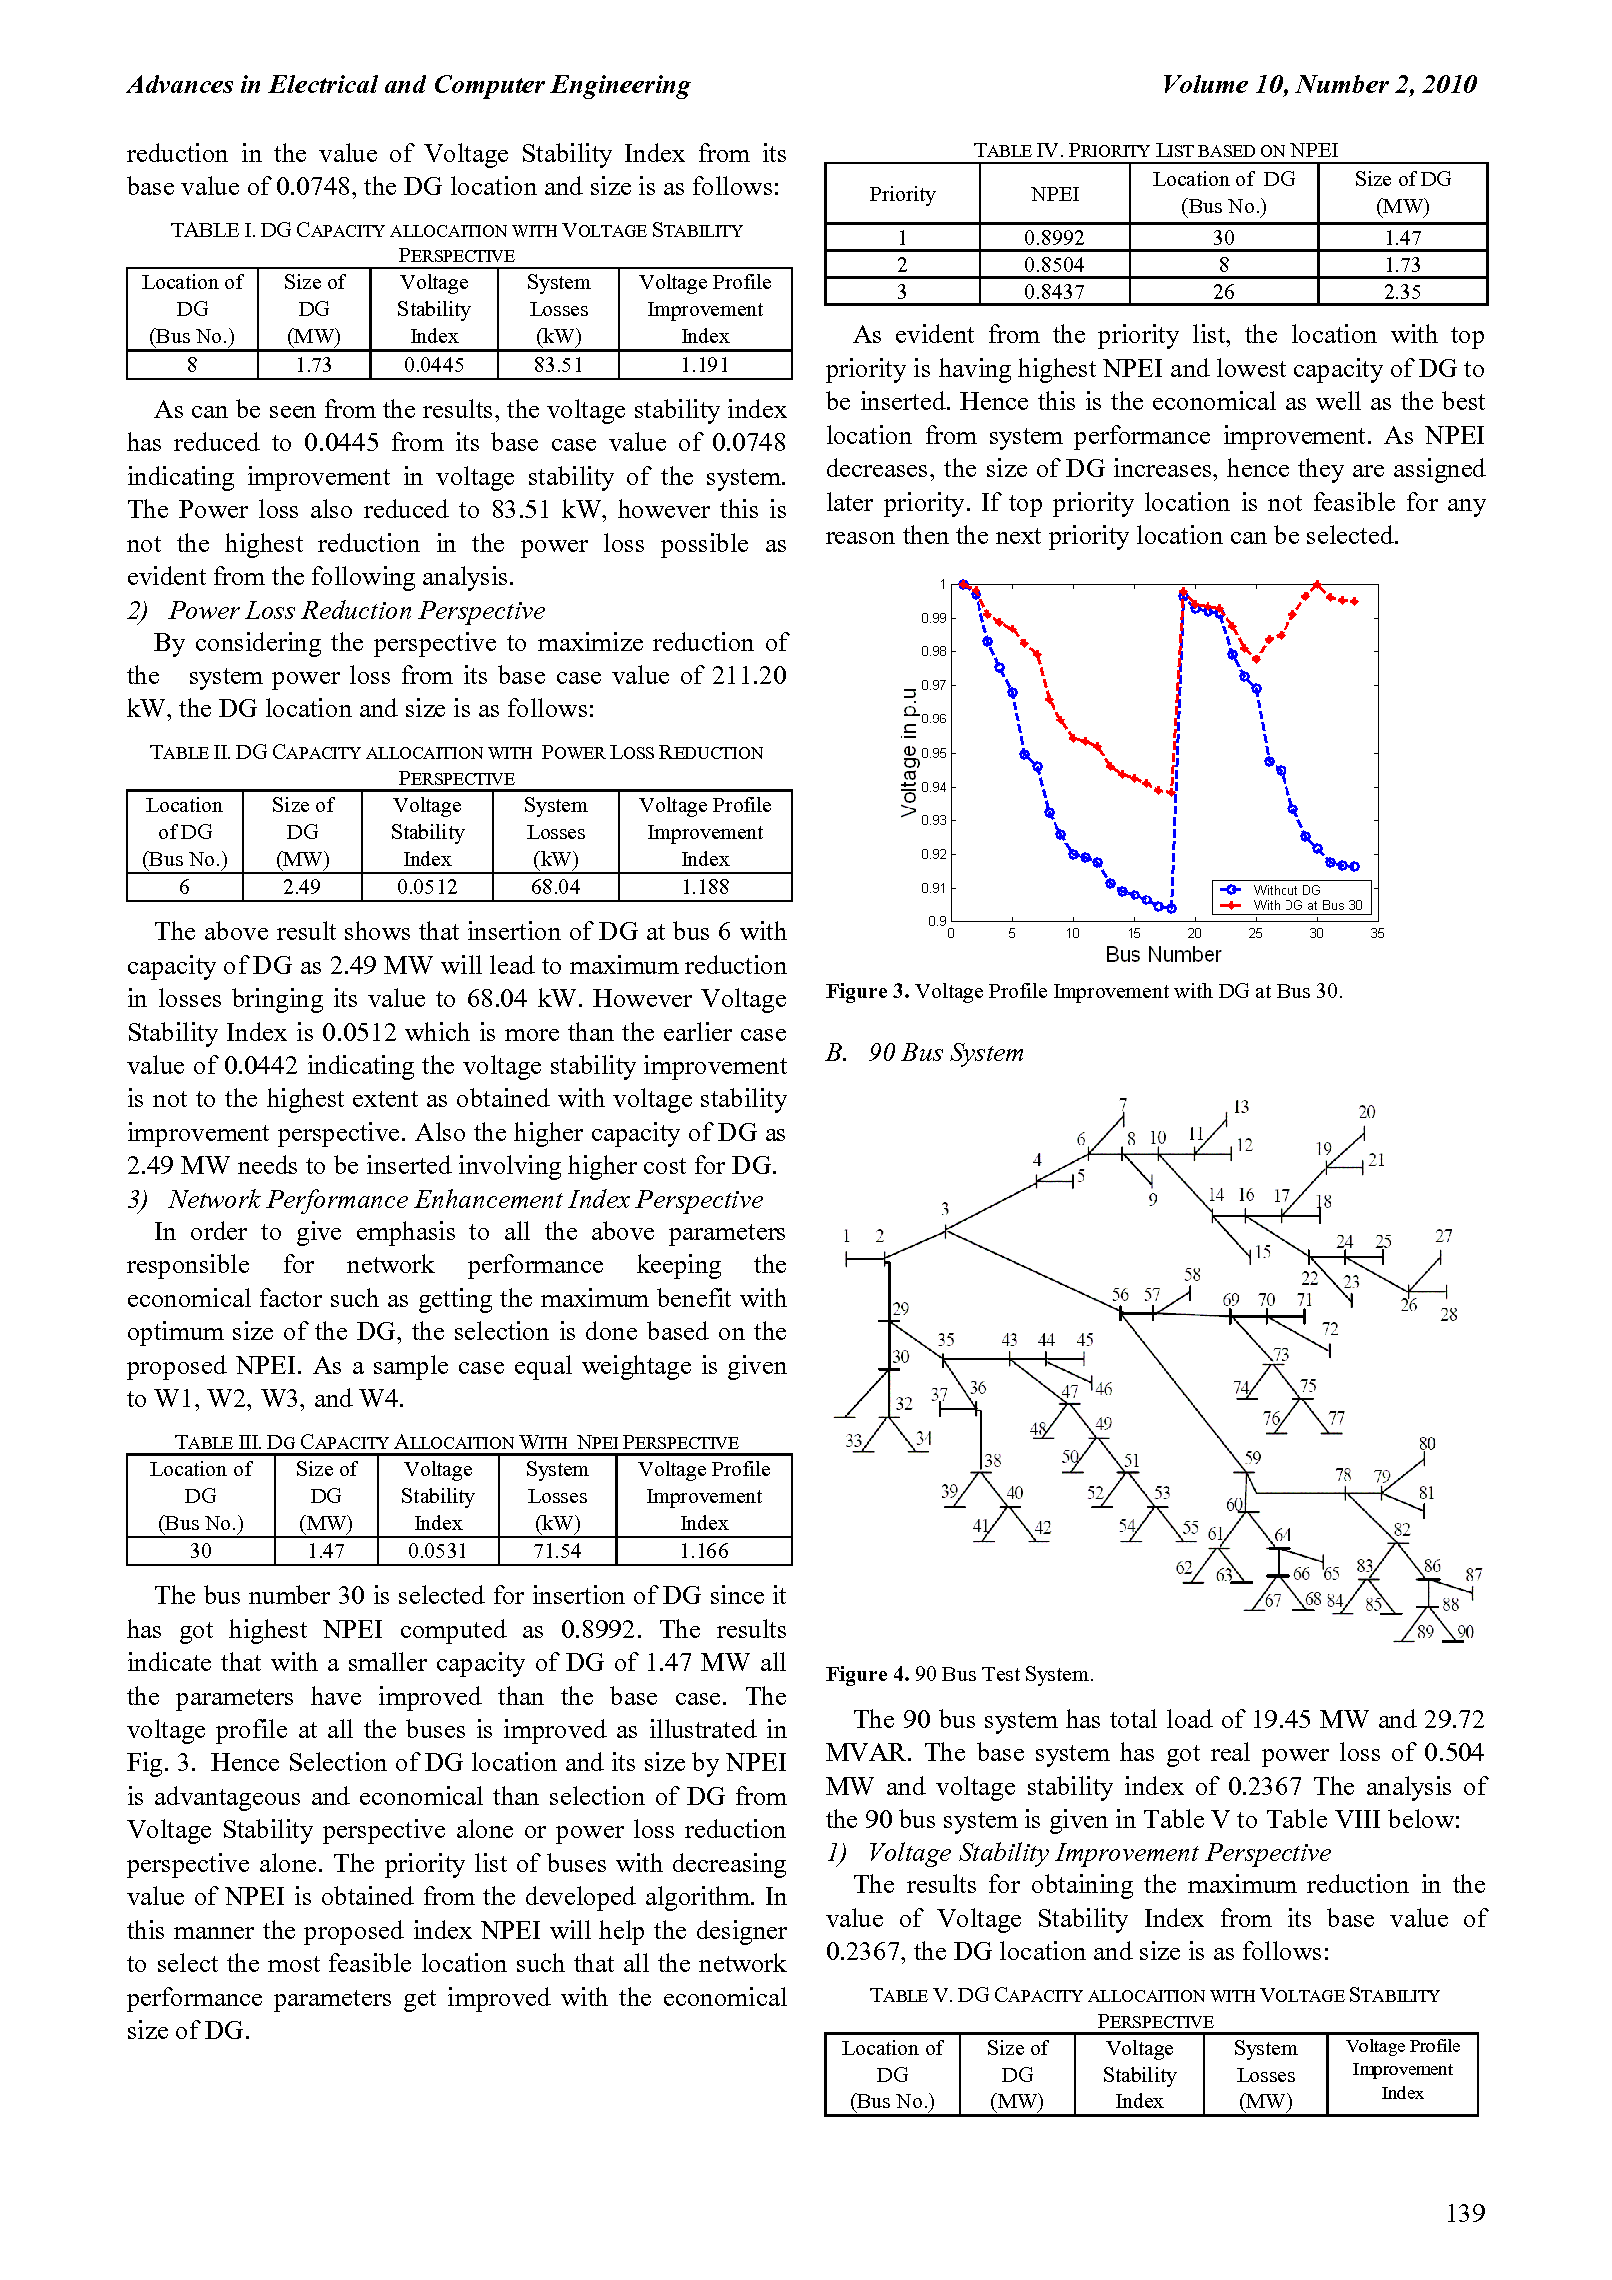 PDF Quickview for paper with DOI:10.4316/AECE.2010.02024